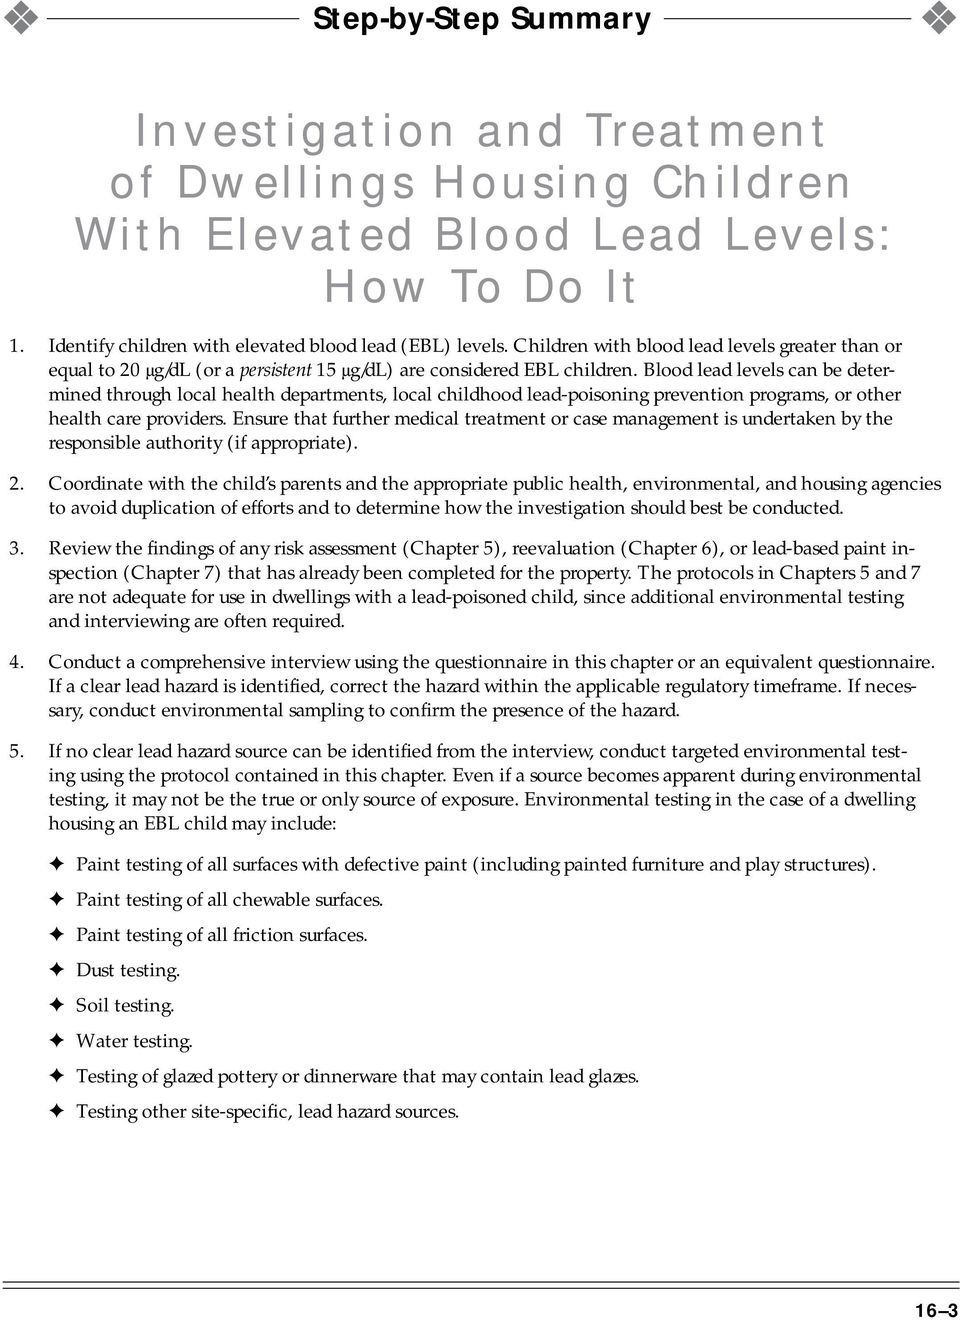 Blood lead levels can be determined through local health departments, local childhood lead-poisoning prevention programs, or other health care providers.